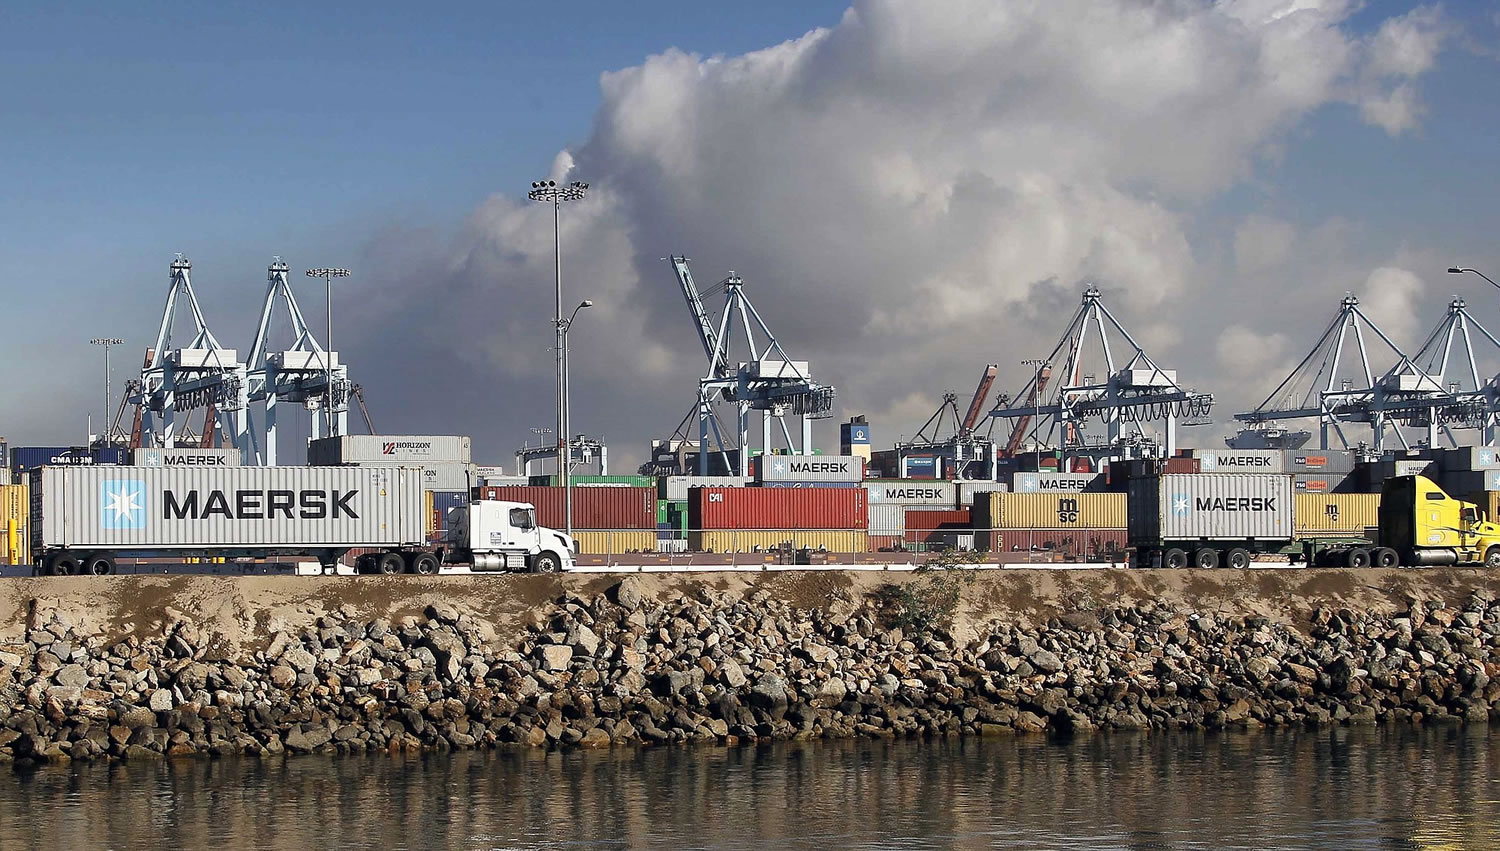 Nick Ut/Associated Press
Tractor-trailers hauling containers leave the Port of Los Angeles on Monday. Nearly all West Coast seaports began the week with dockworkers hustling to load and unload cargo ships that were held up amid a months-long labor-management dispute.